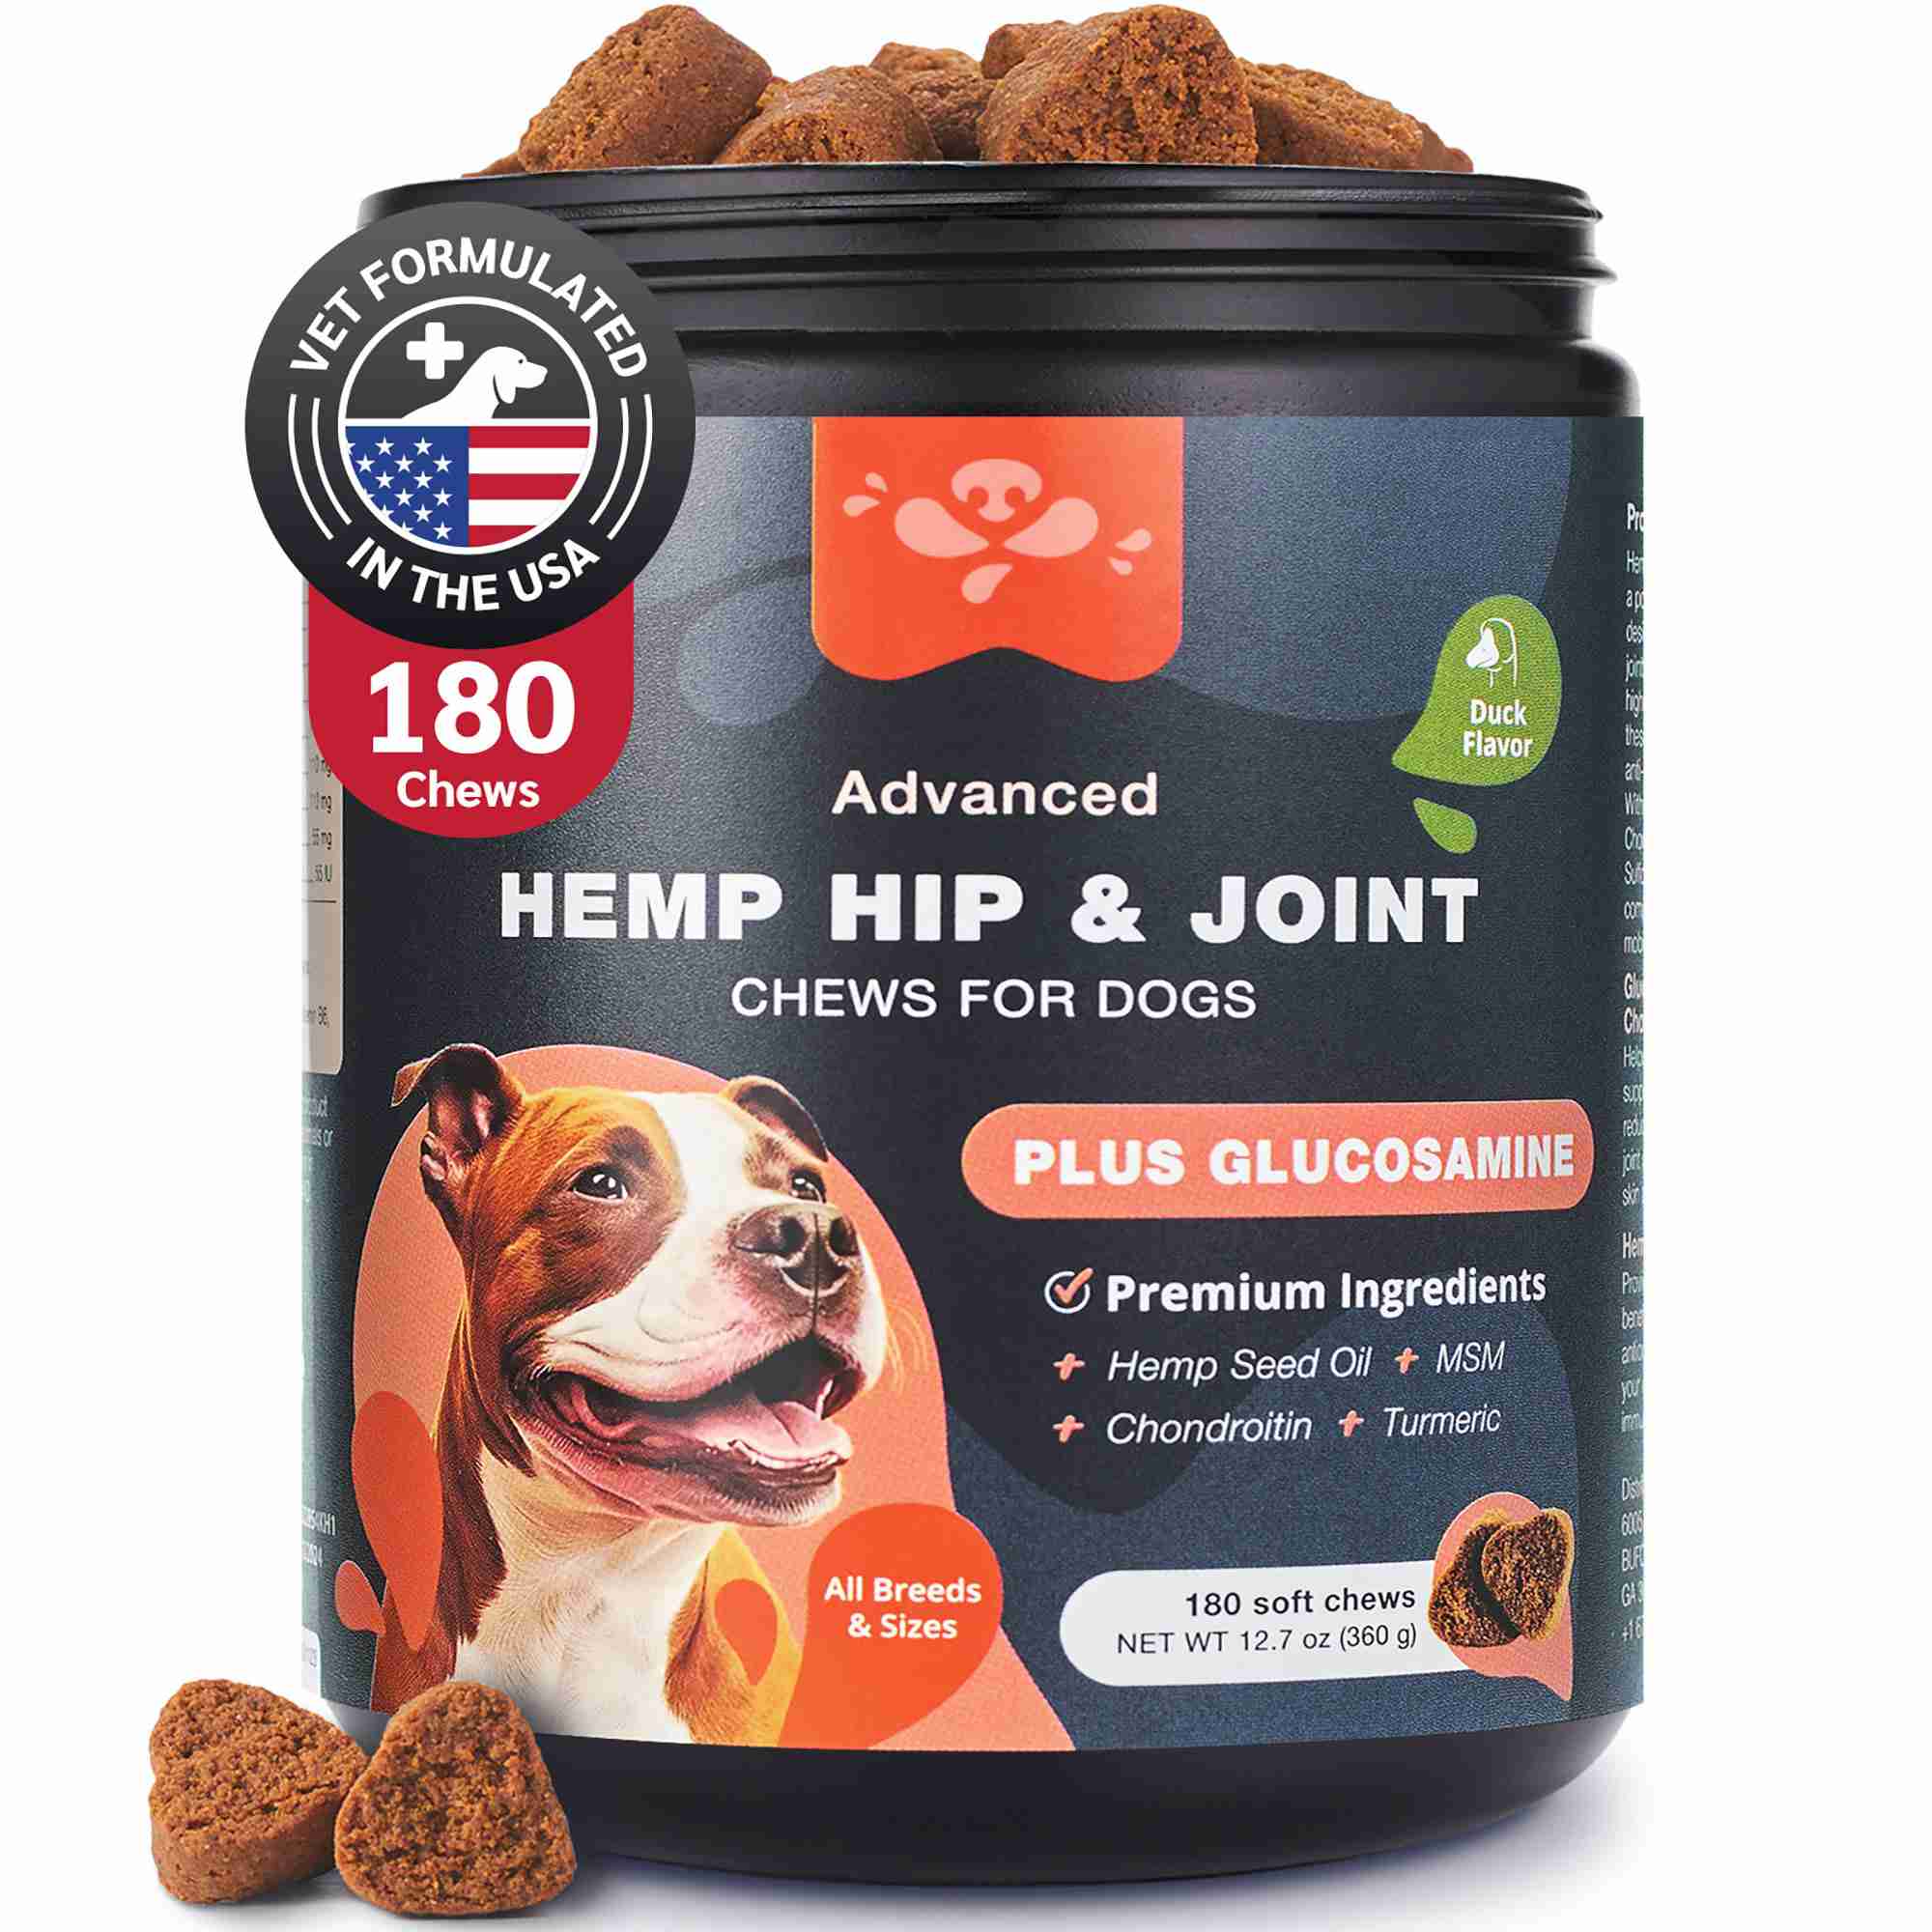 glucosamine-for-dogs with cash back rebate